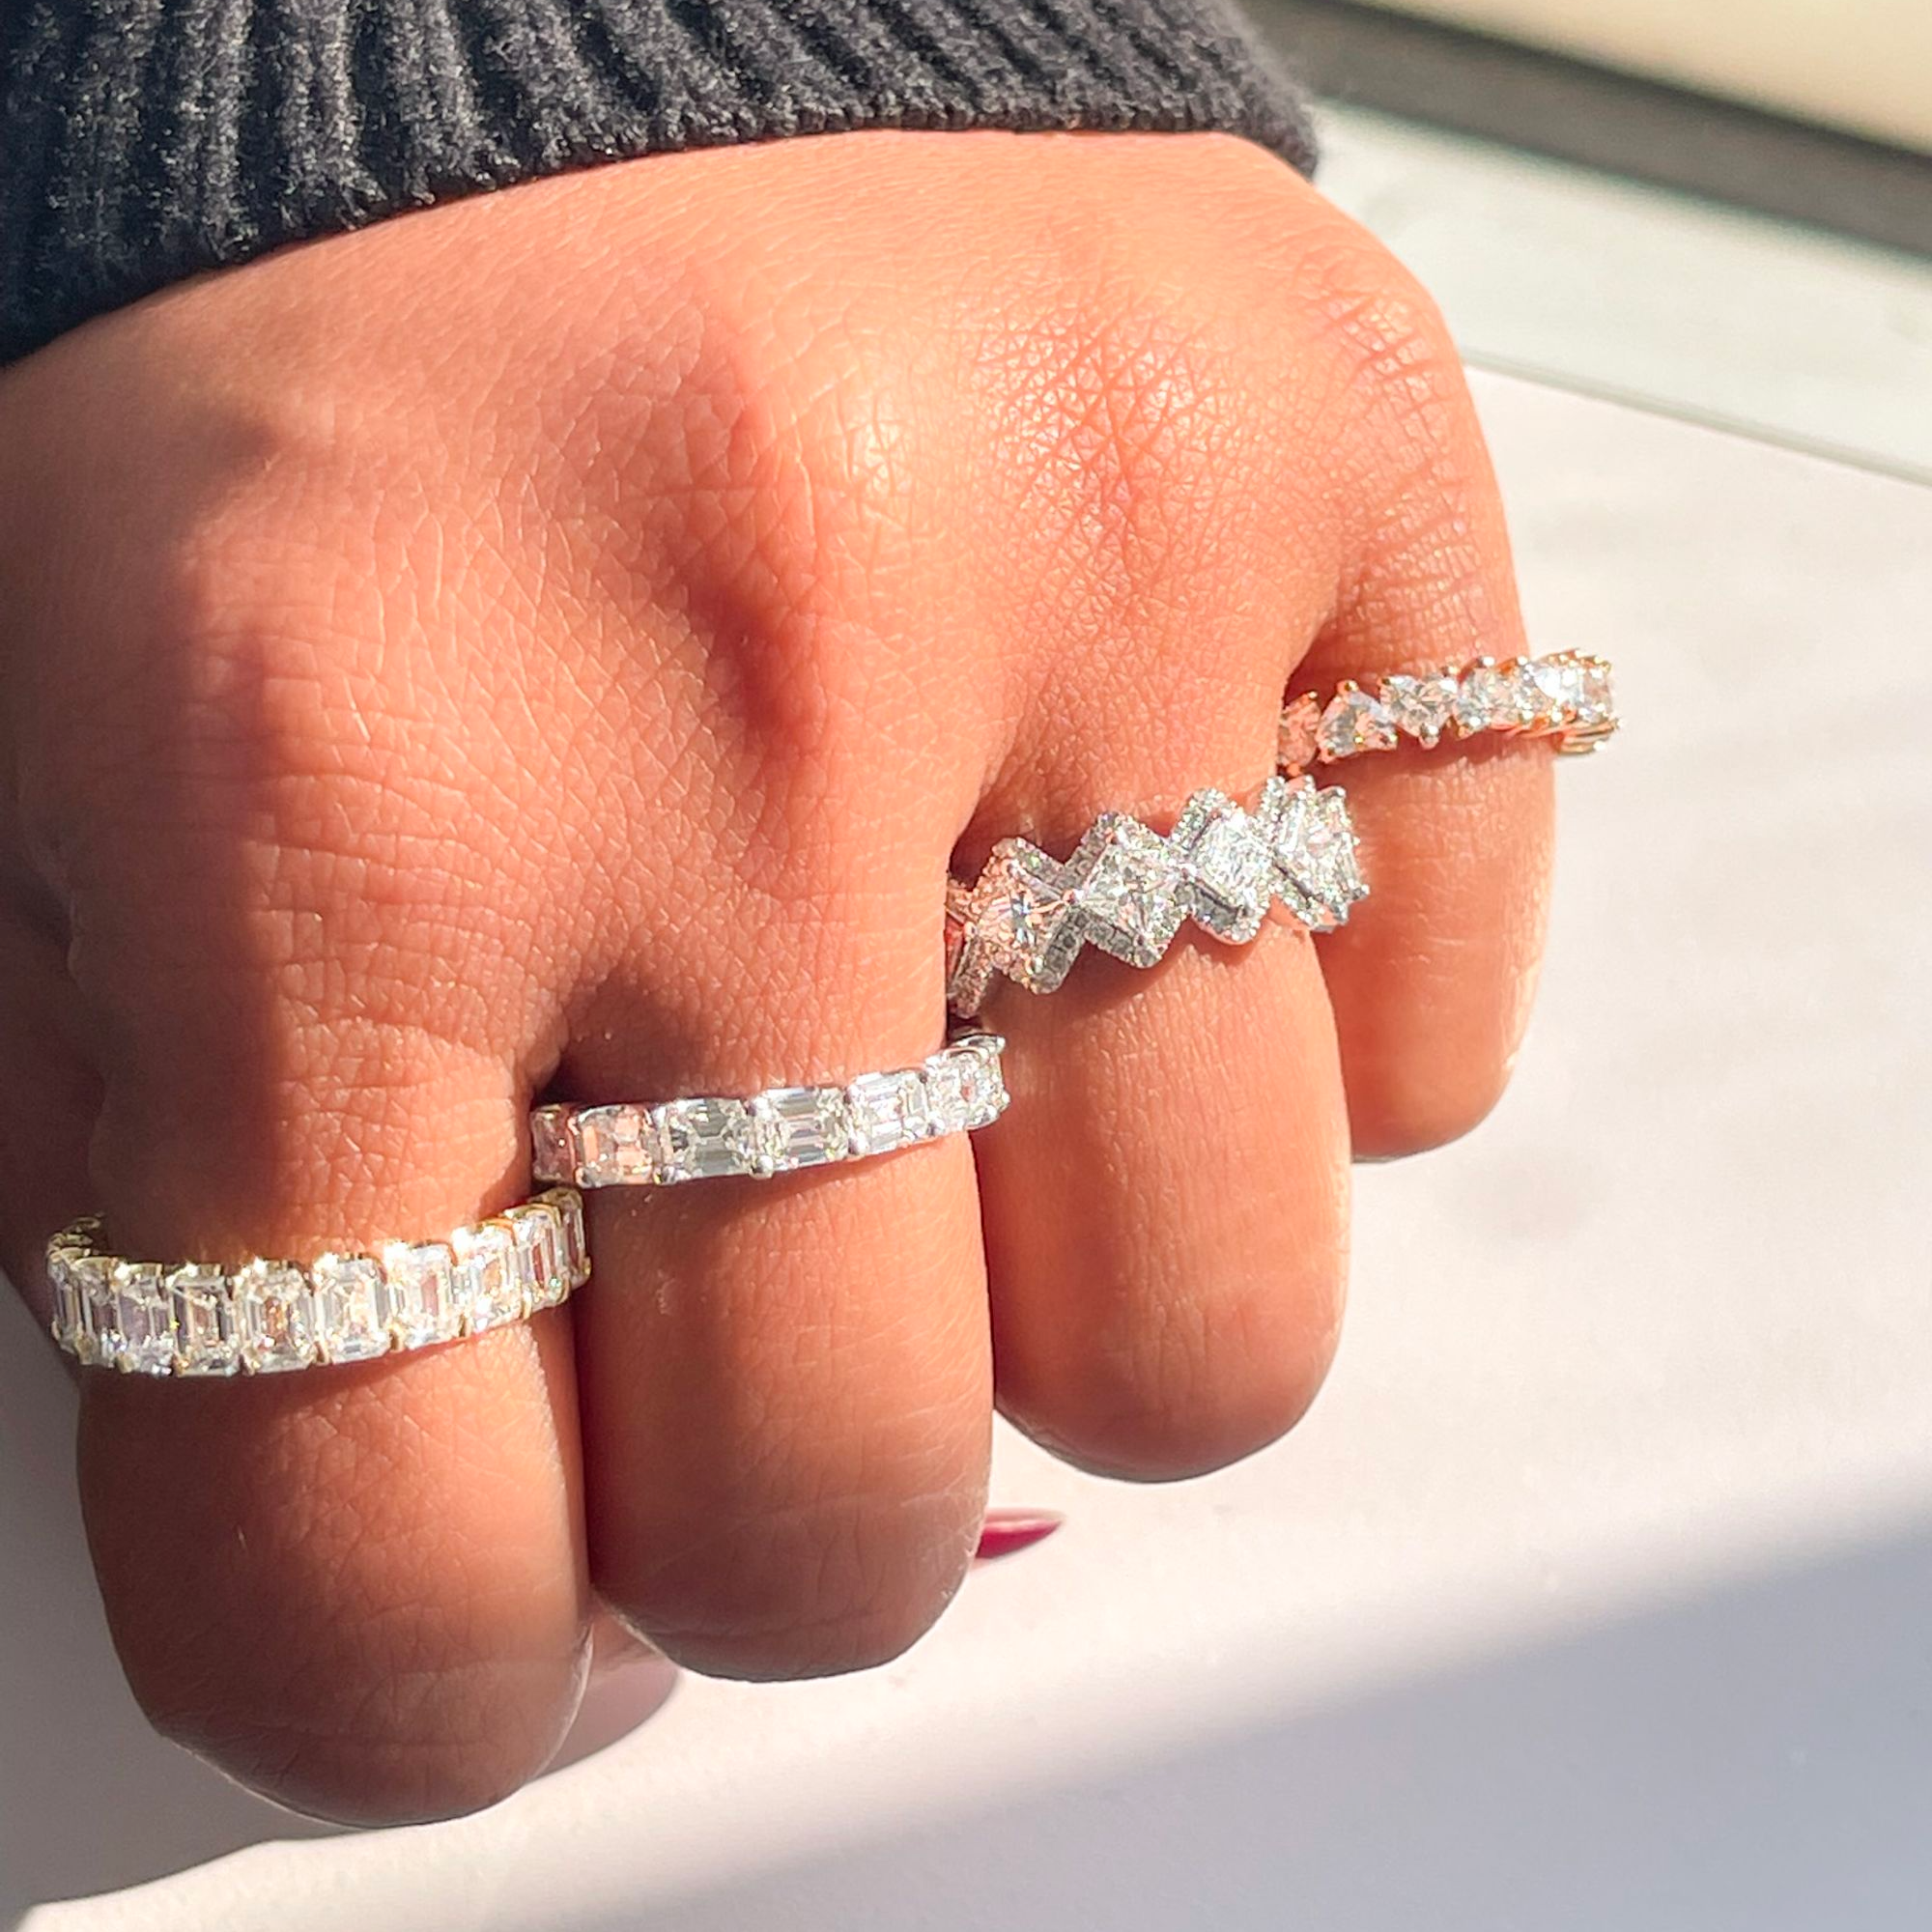 Symbolizing Forever: The Meaning Behind Diamond Eternity Rings